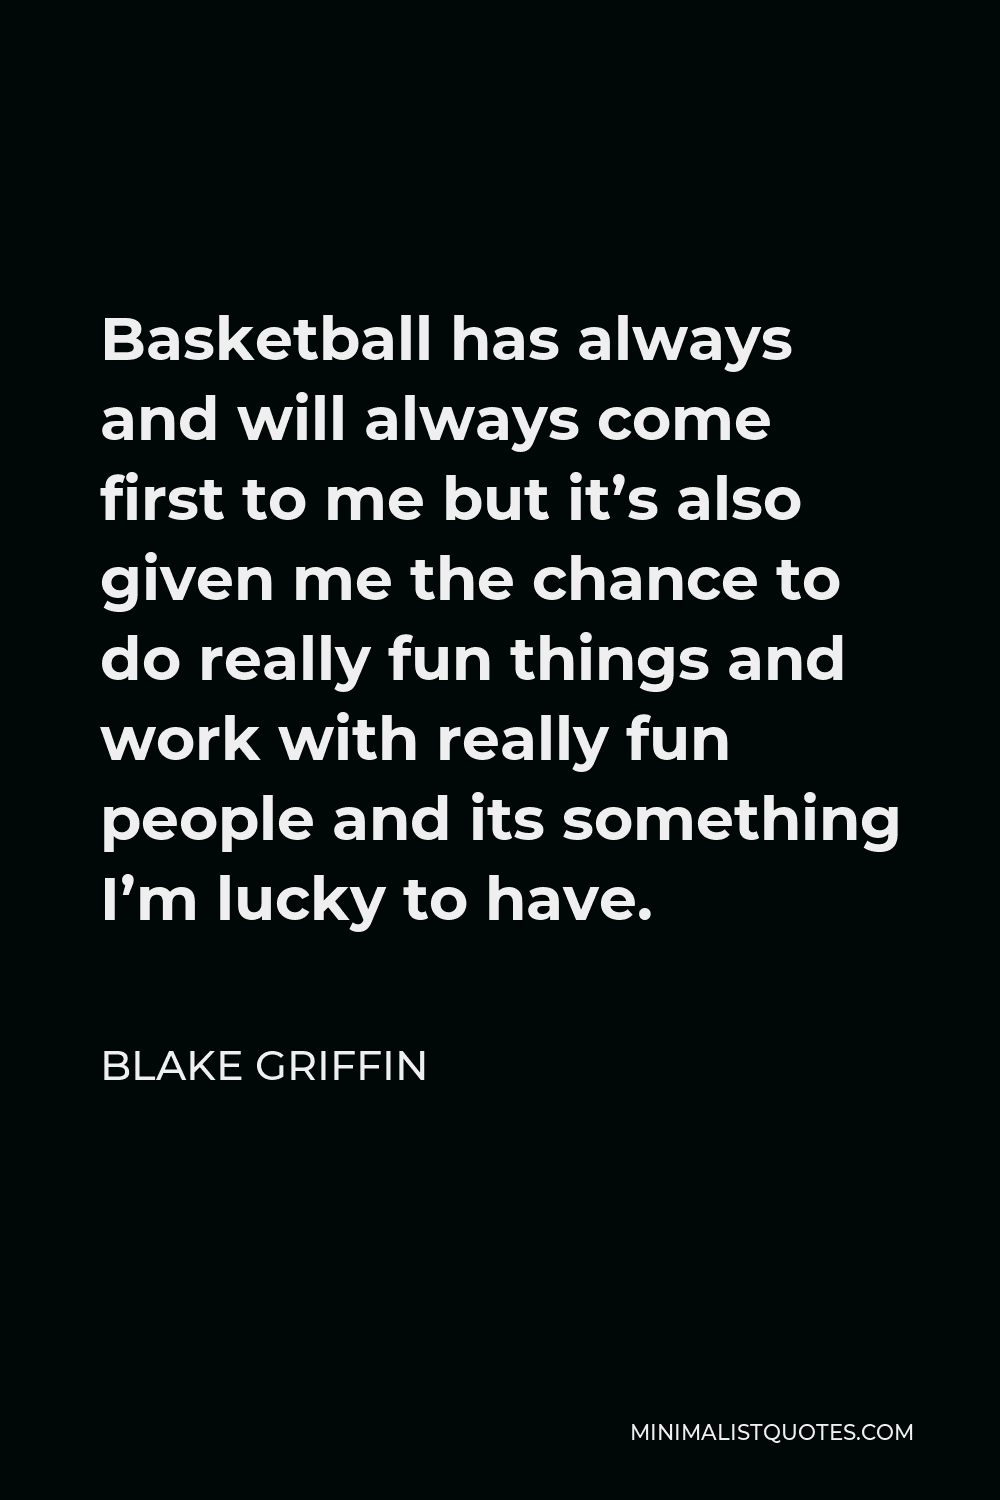 Blake Griffin Quote - Basketball has always and will always come first to me but it’s also given me the chance to do really fun things and work with really fun people and its something I’m lucky to have.